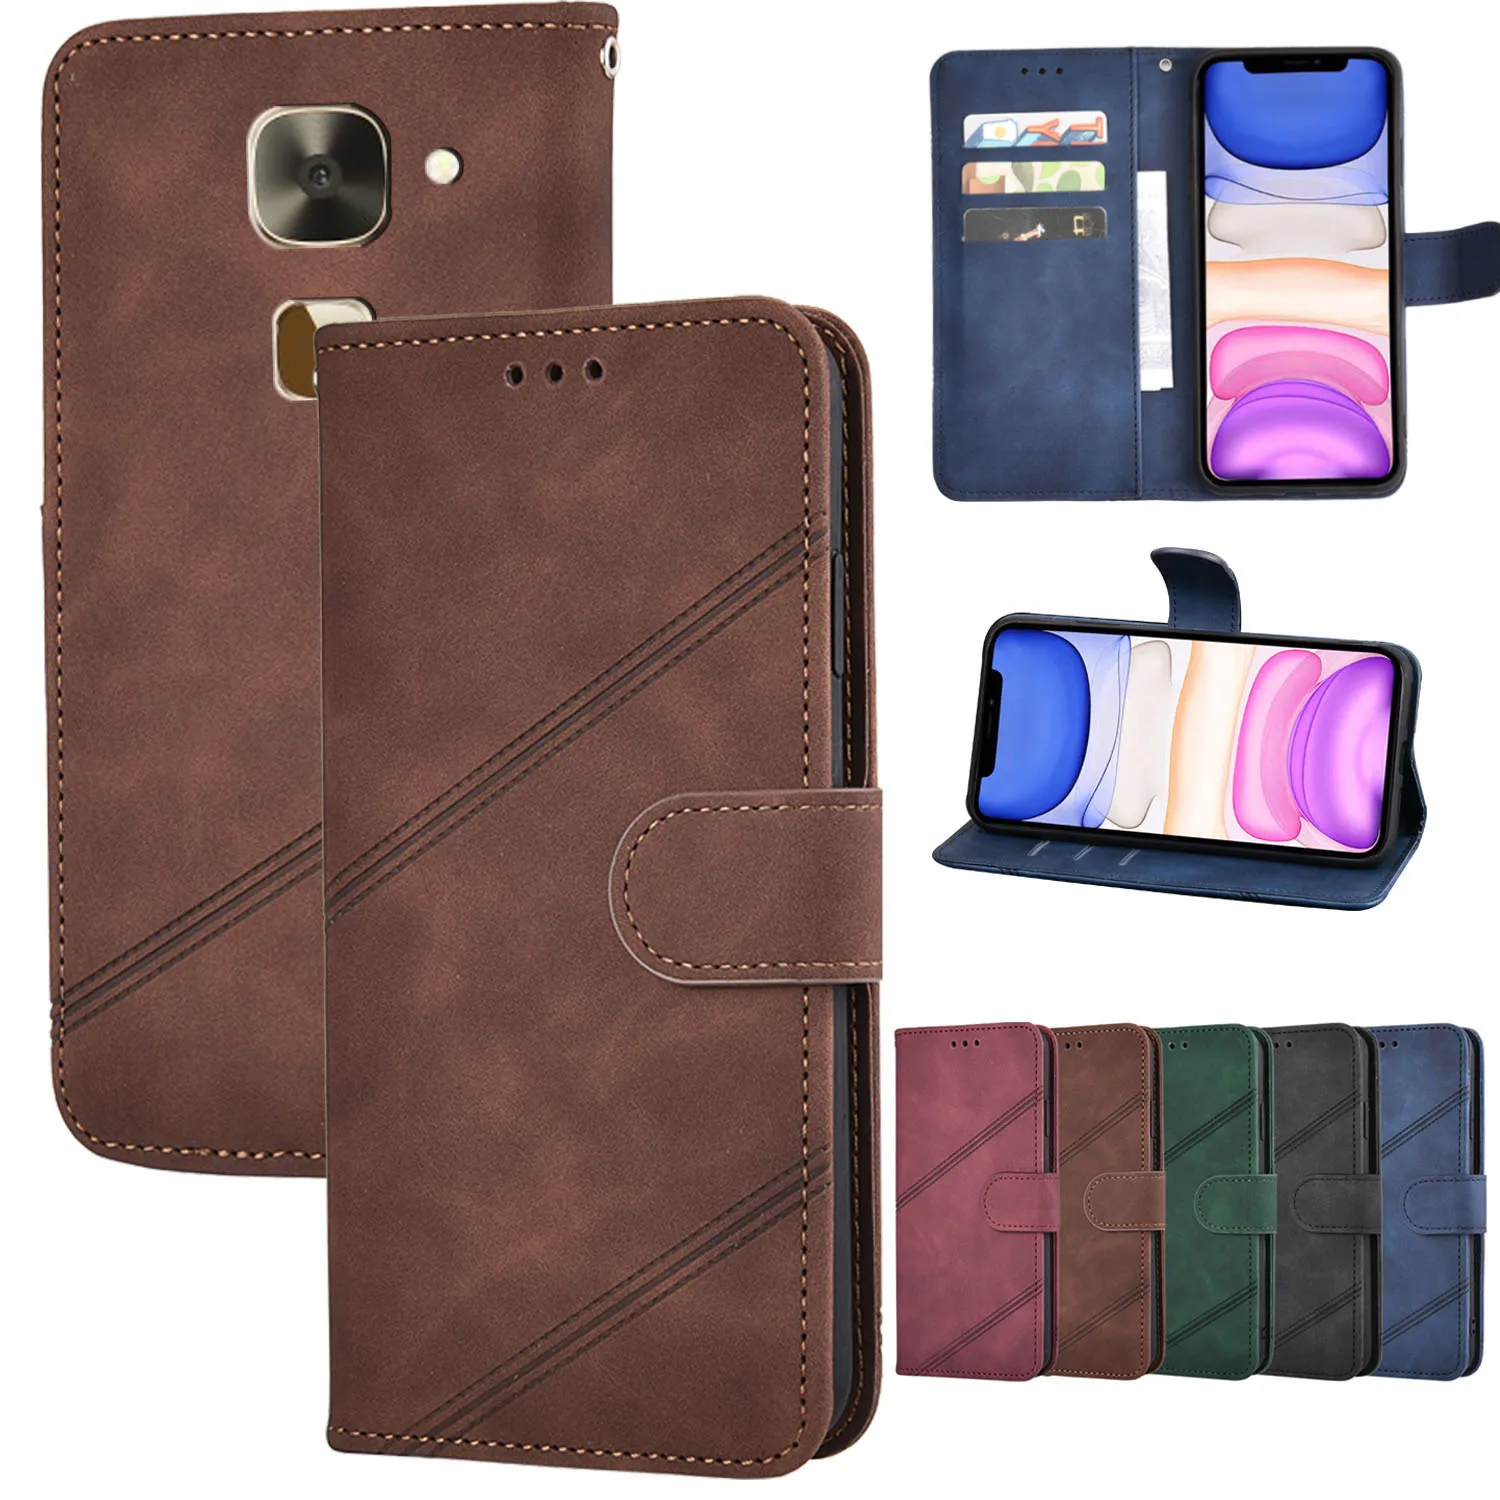 

Wallet Leather Flip Cover For Letv Leeco Le S1 1S 2S Cool 1 2 Pro 3 S3 Max 2 X25 X527 X520 X526 X625 X900 X600 X800 Phone Case